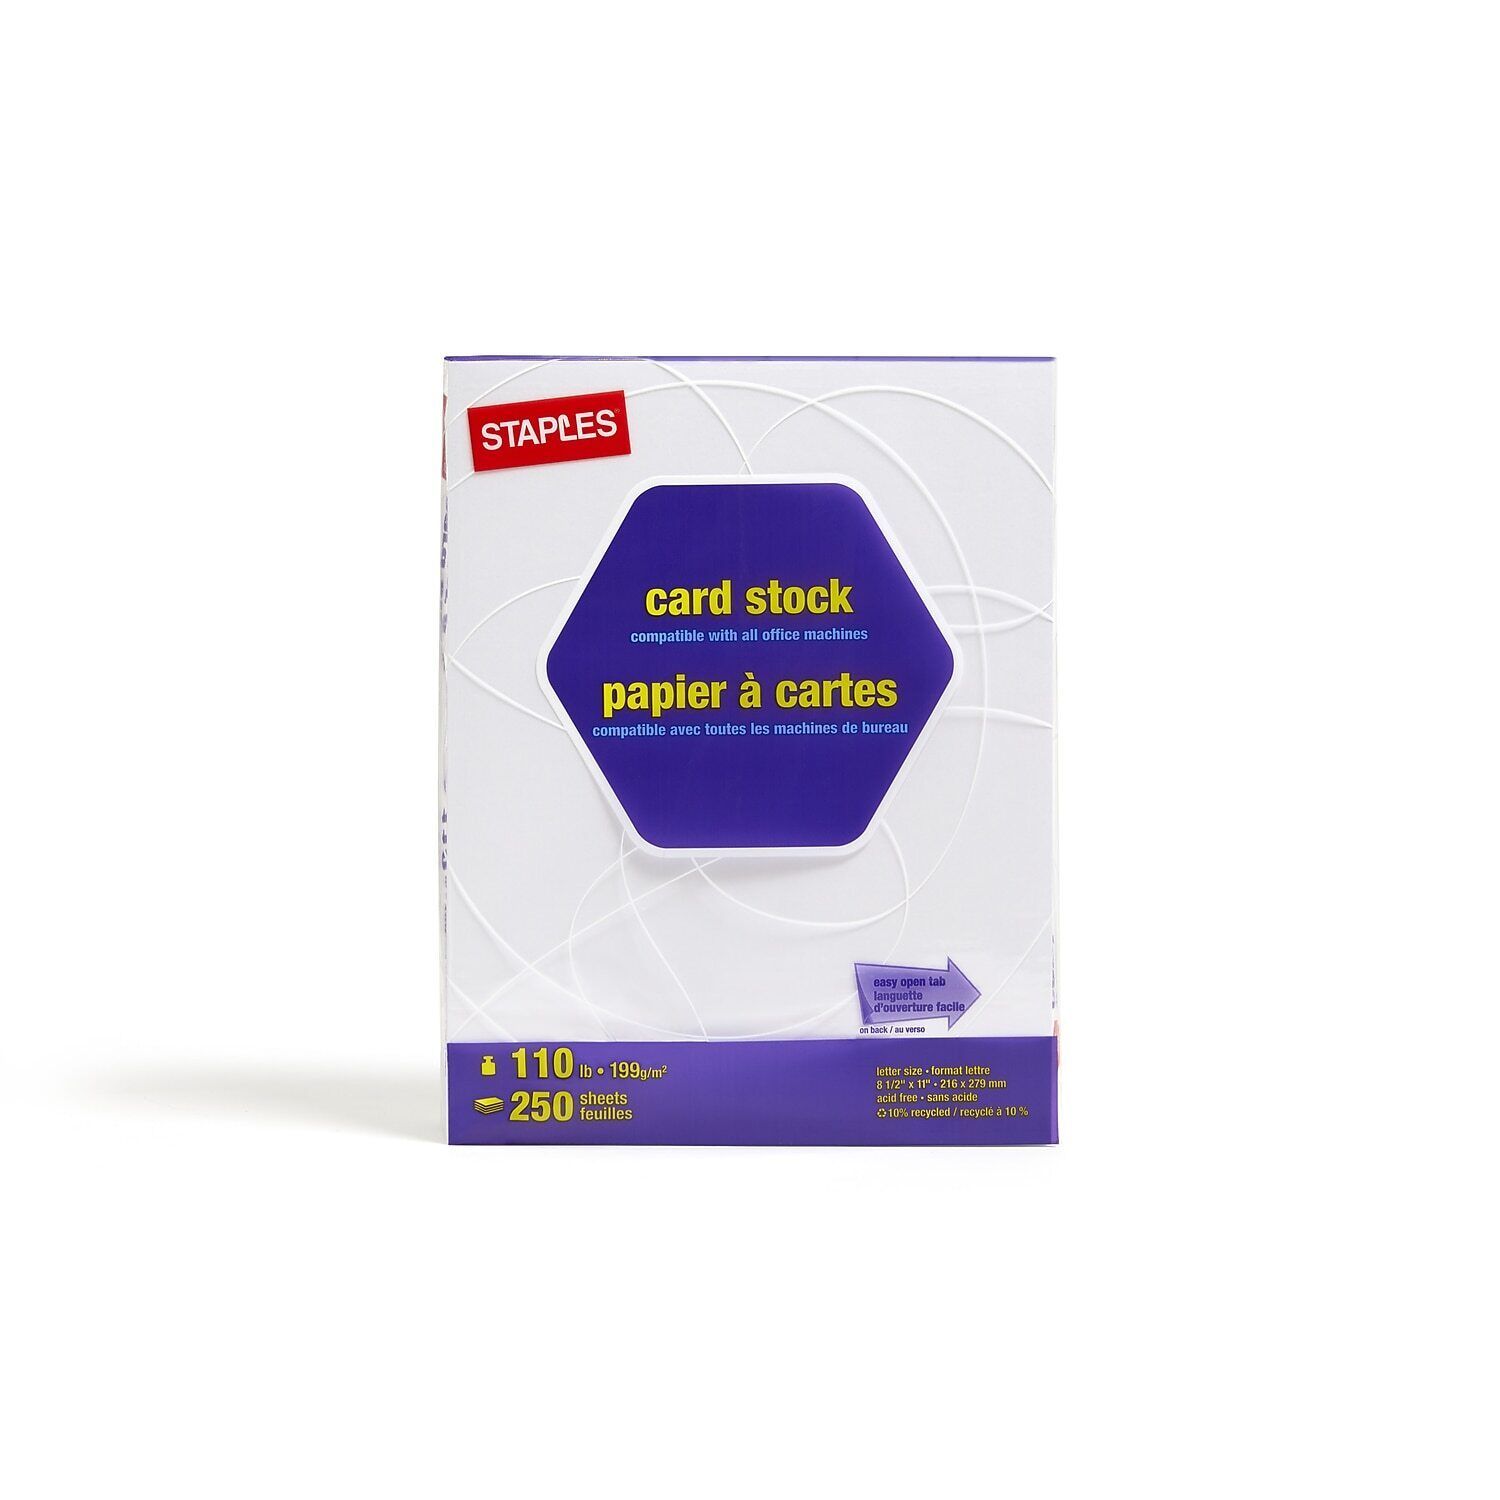 Staples Cardstock Paper 110 lbs 8.5 x 11 Canary 250/Pack (49704